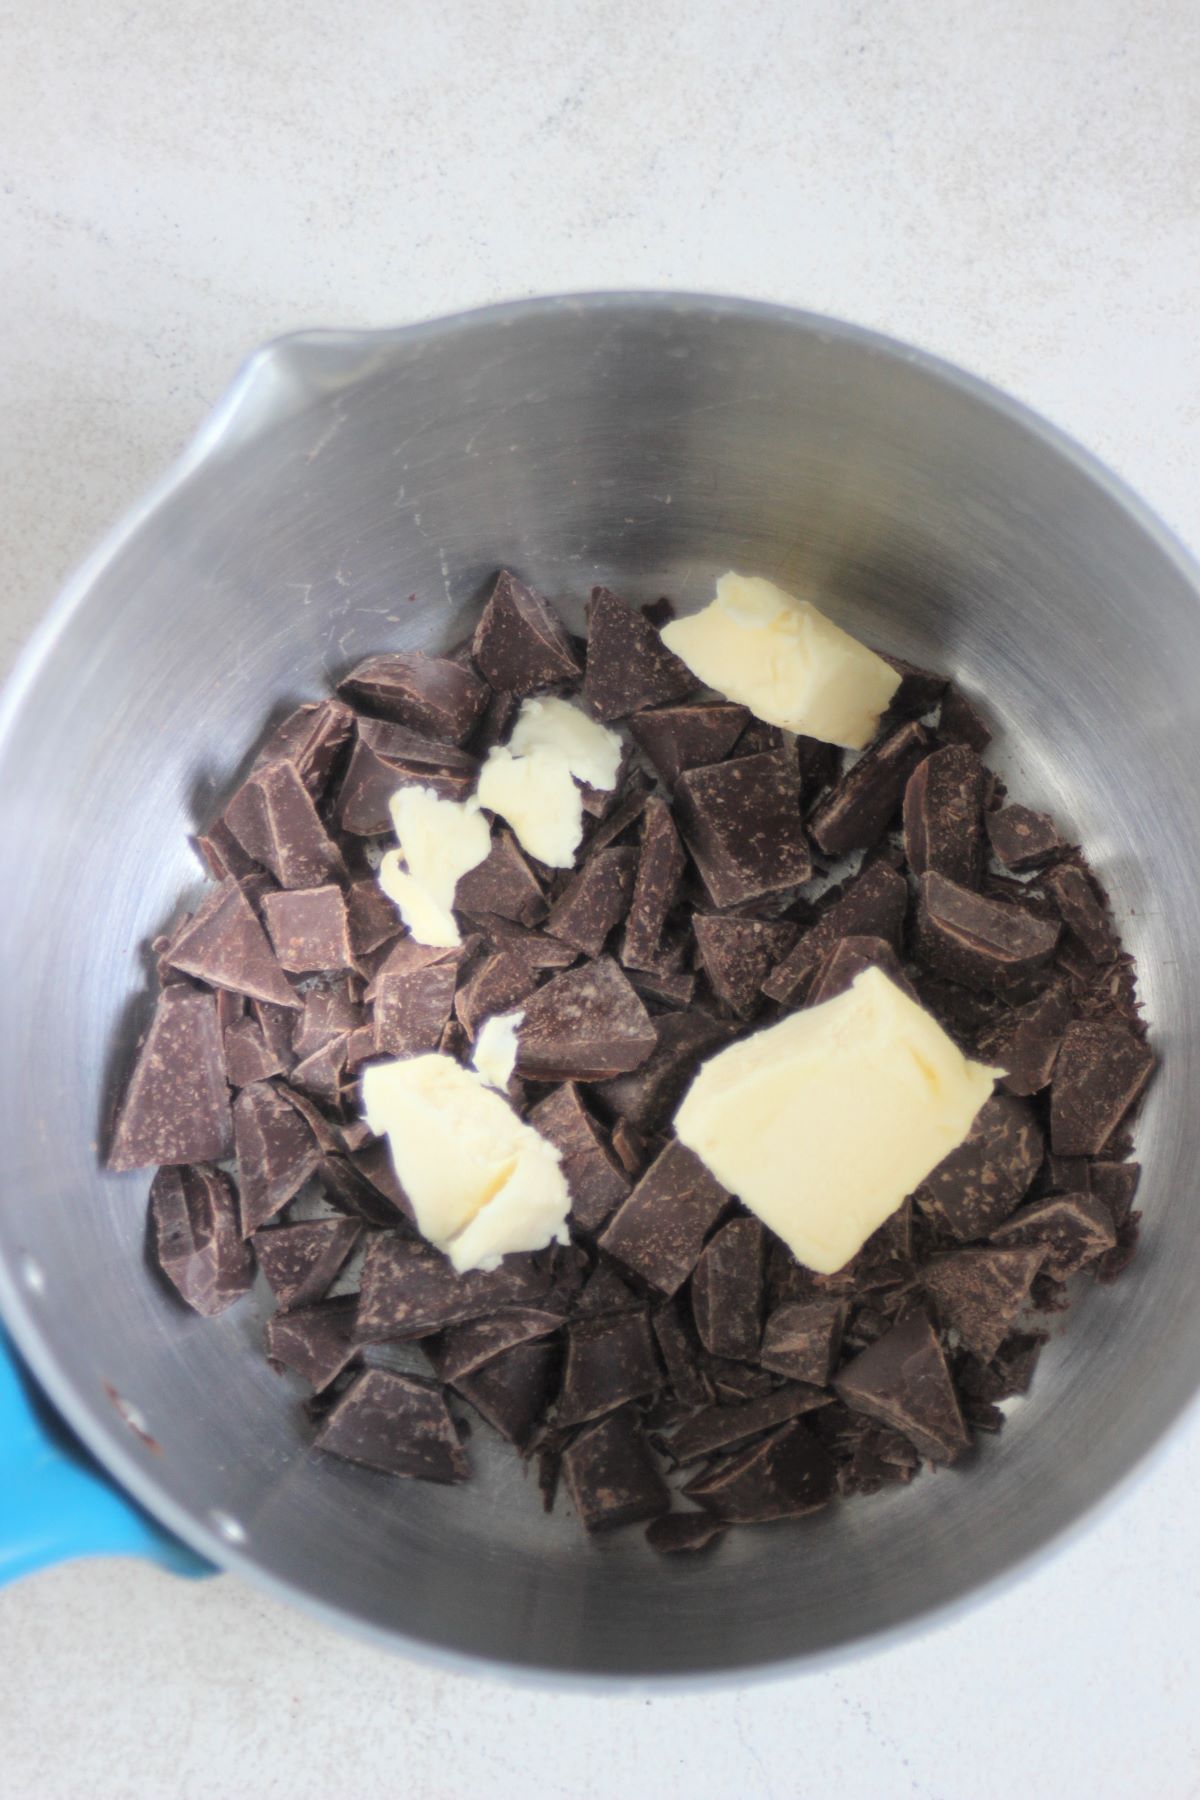 Chopped chocolate and pieces of butter in a deep saucepan.